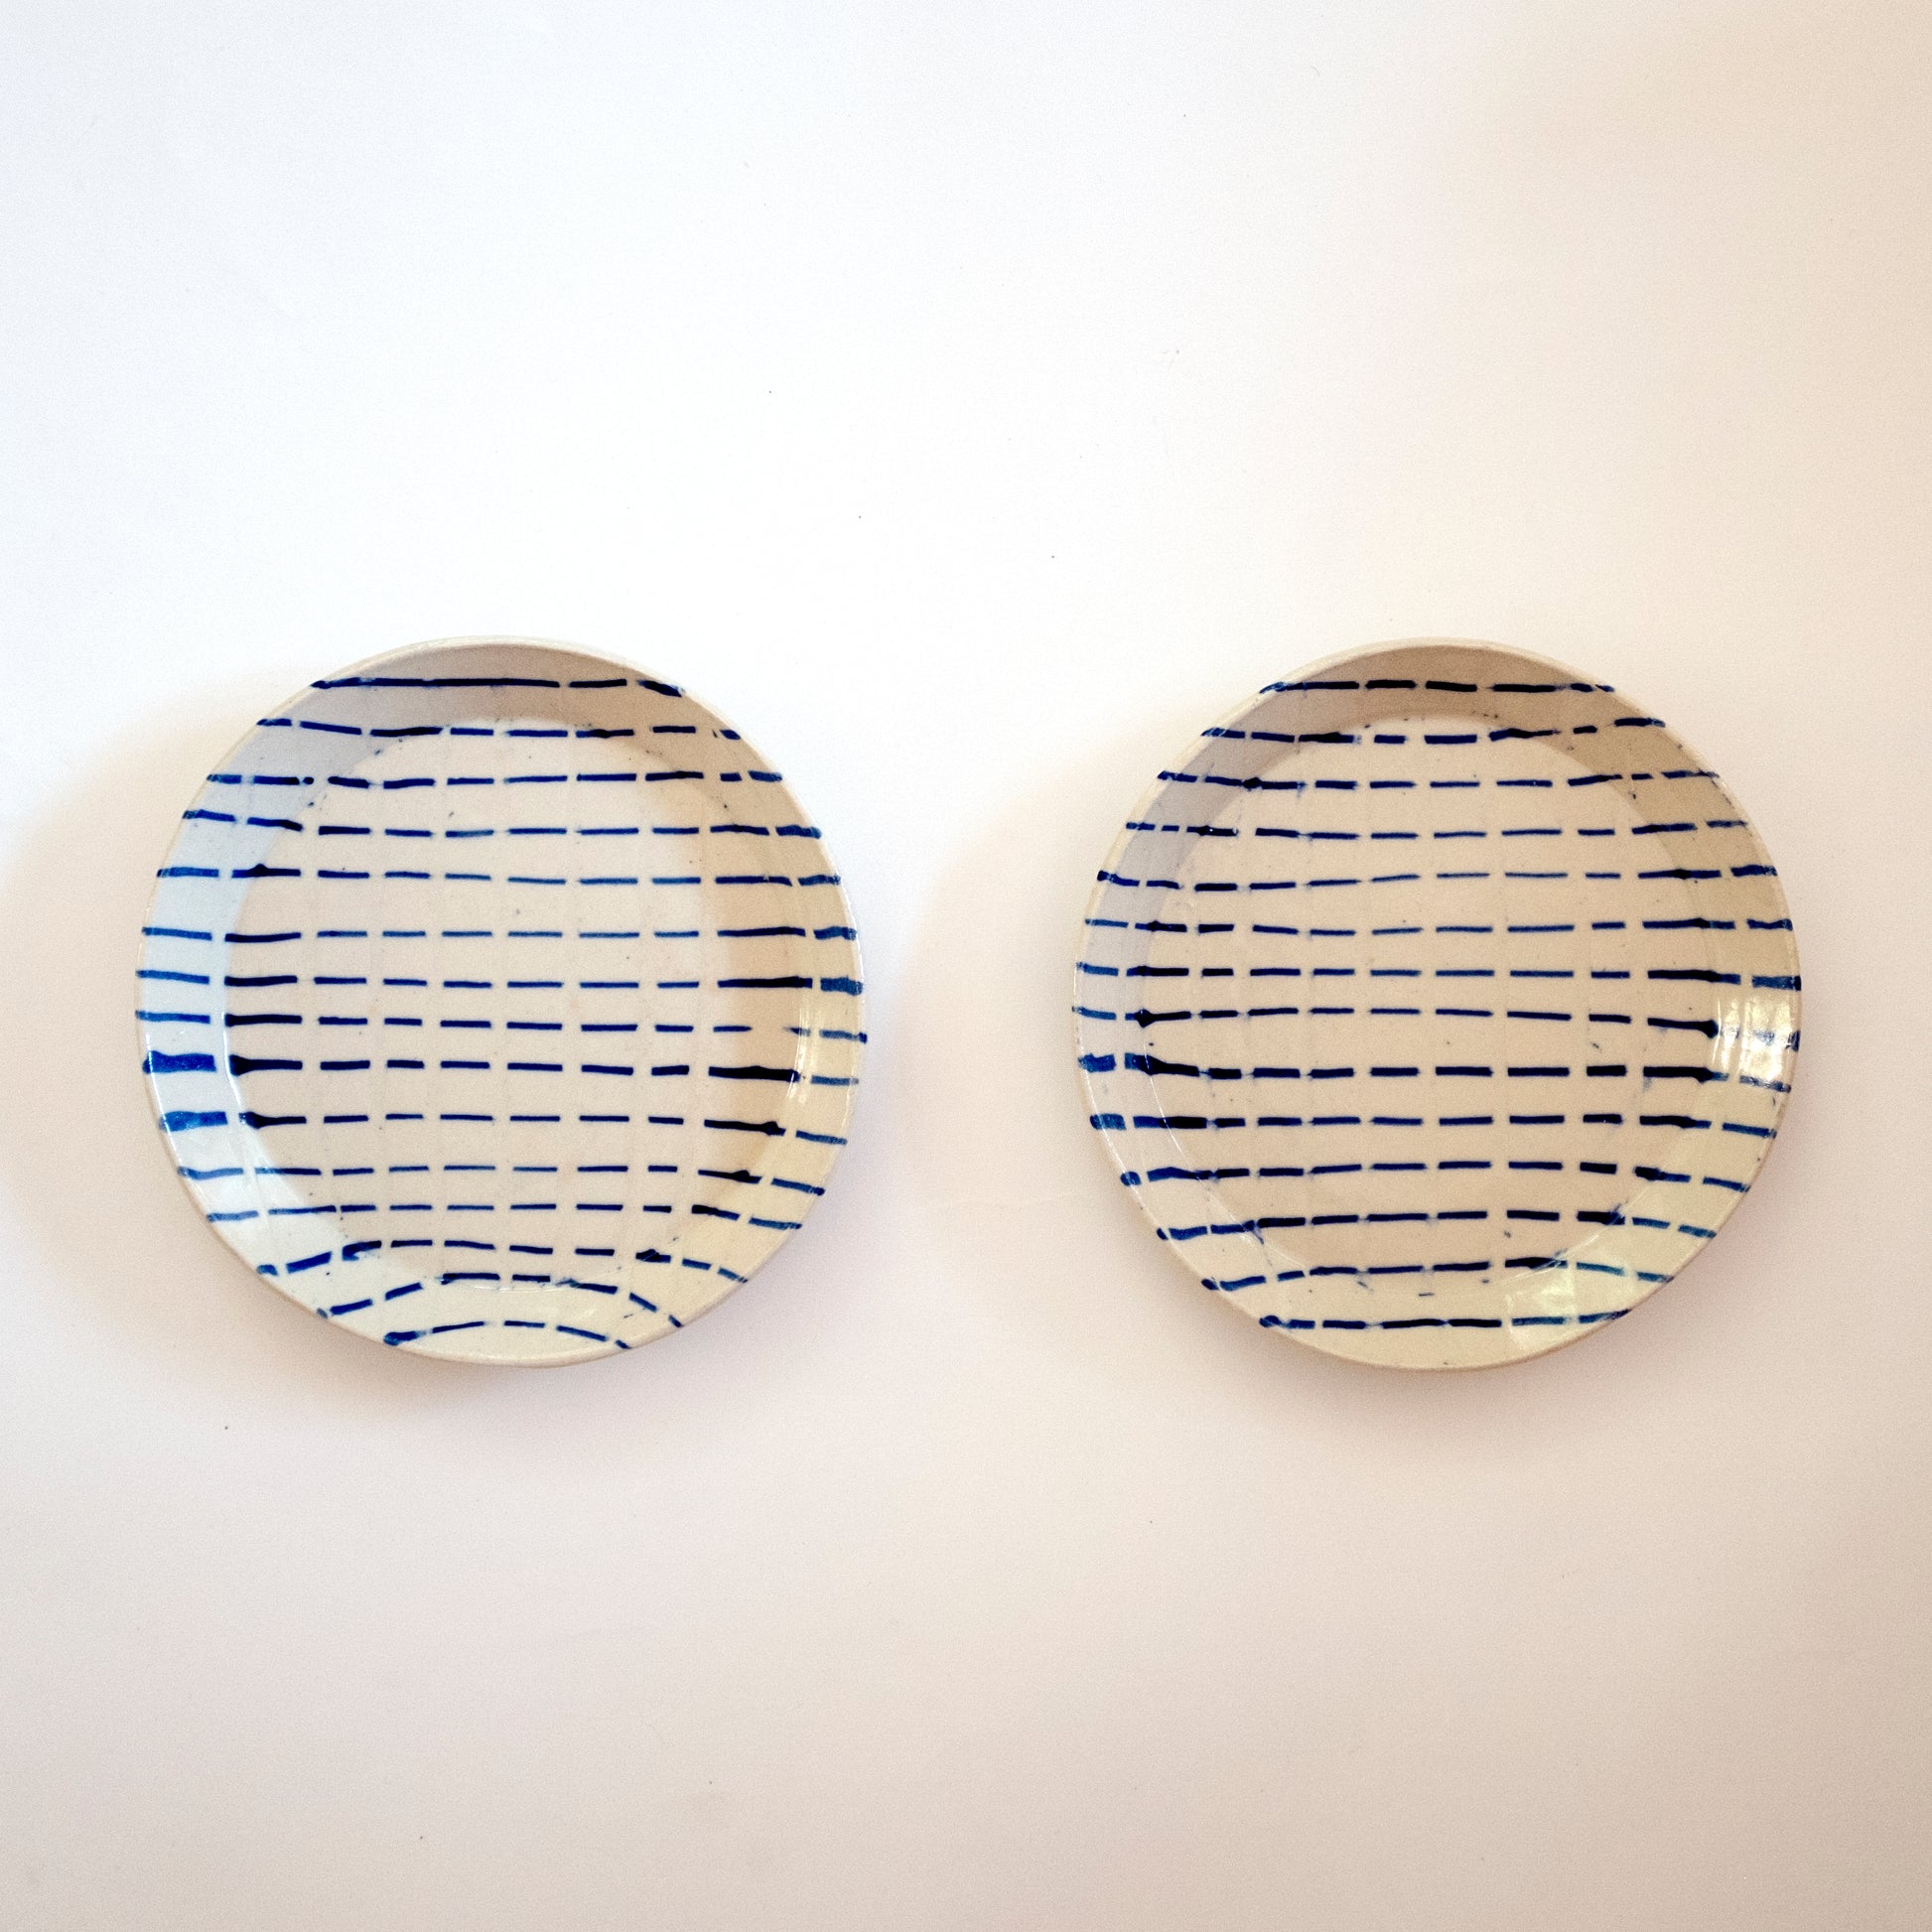 Dashed Line Set of 2 Plates - rust designs